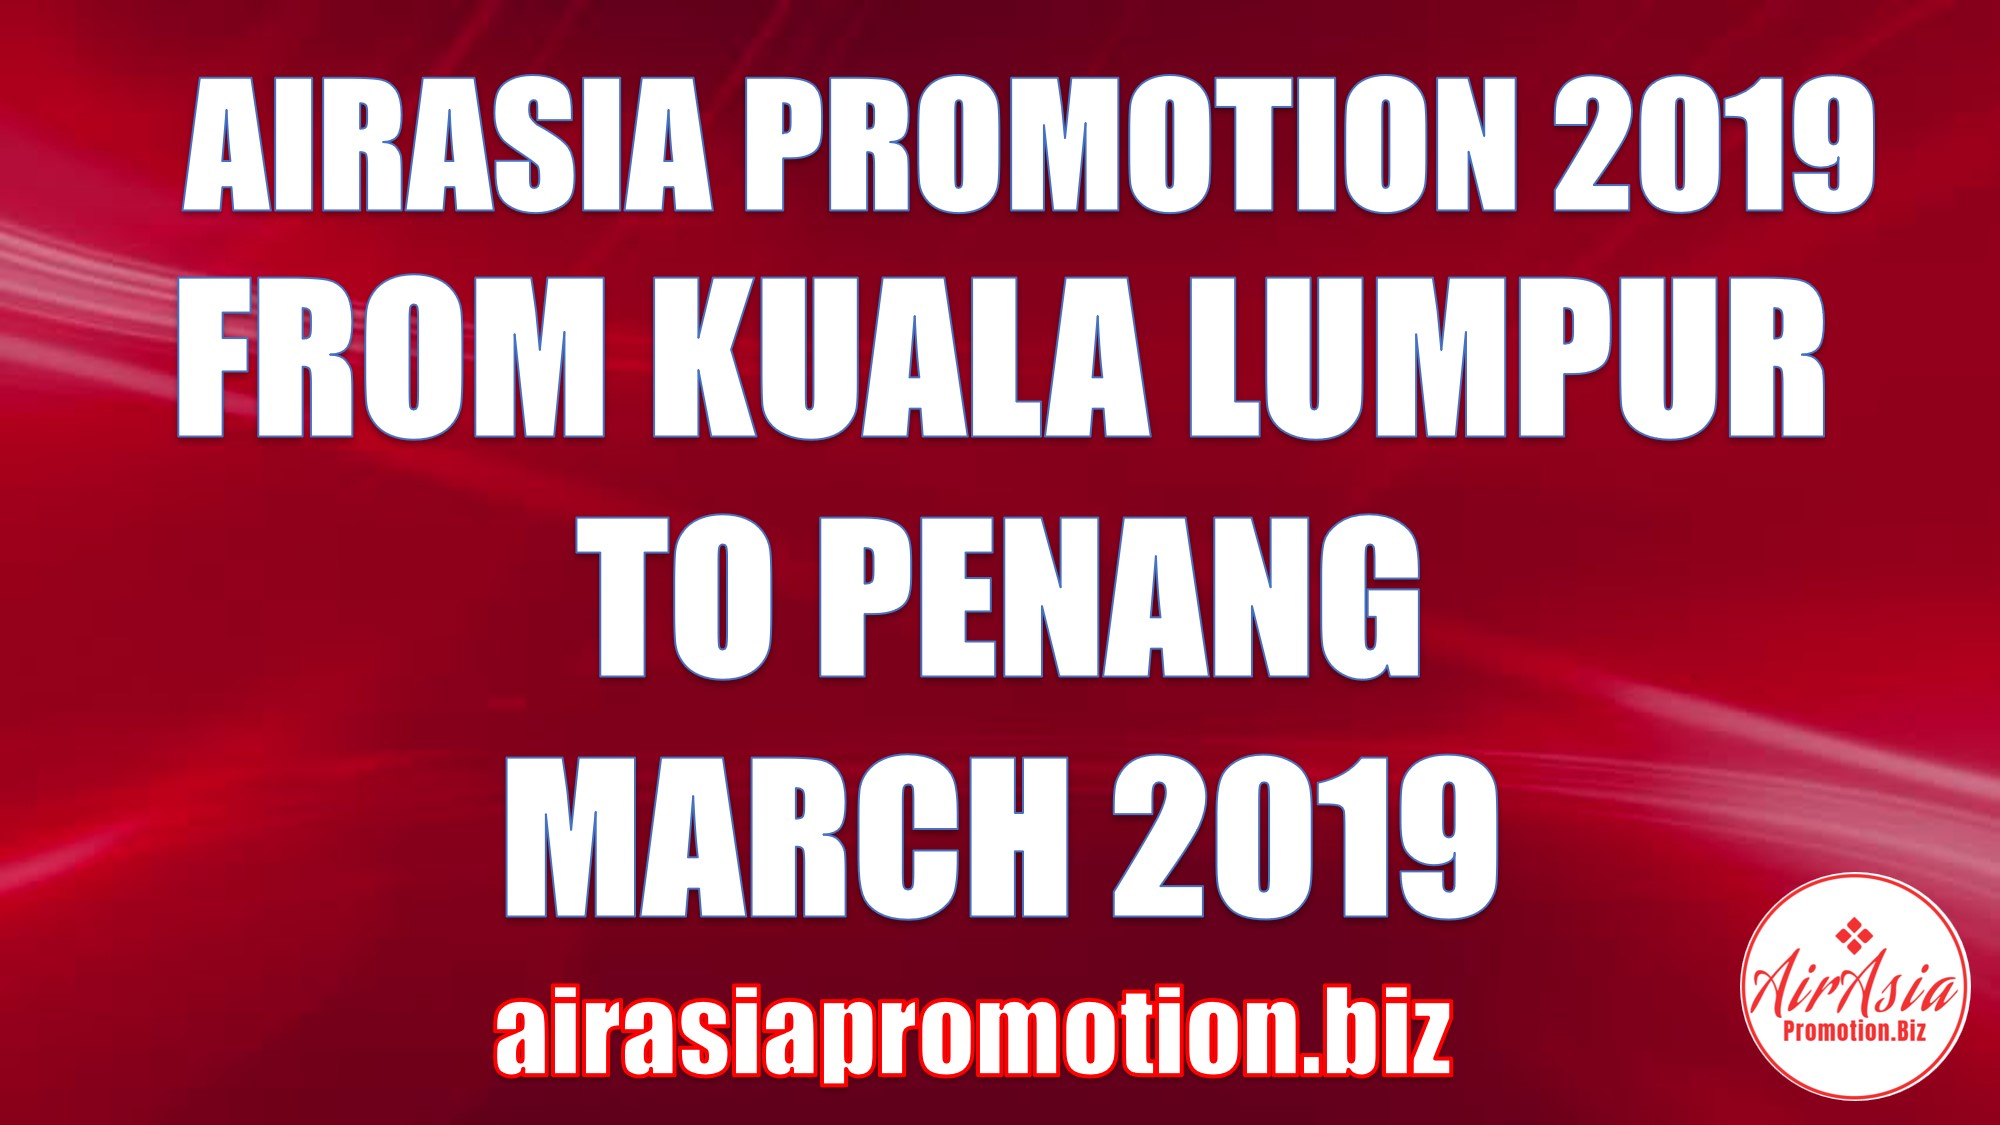 AirAsia Promotion From Kuala Lumpur To Penang March 2019